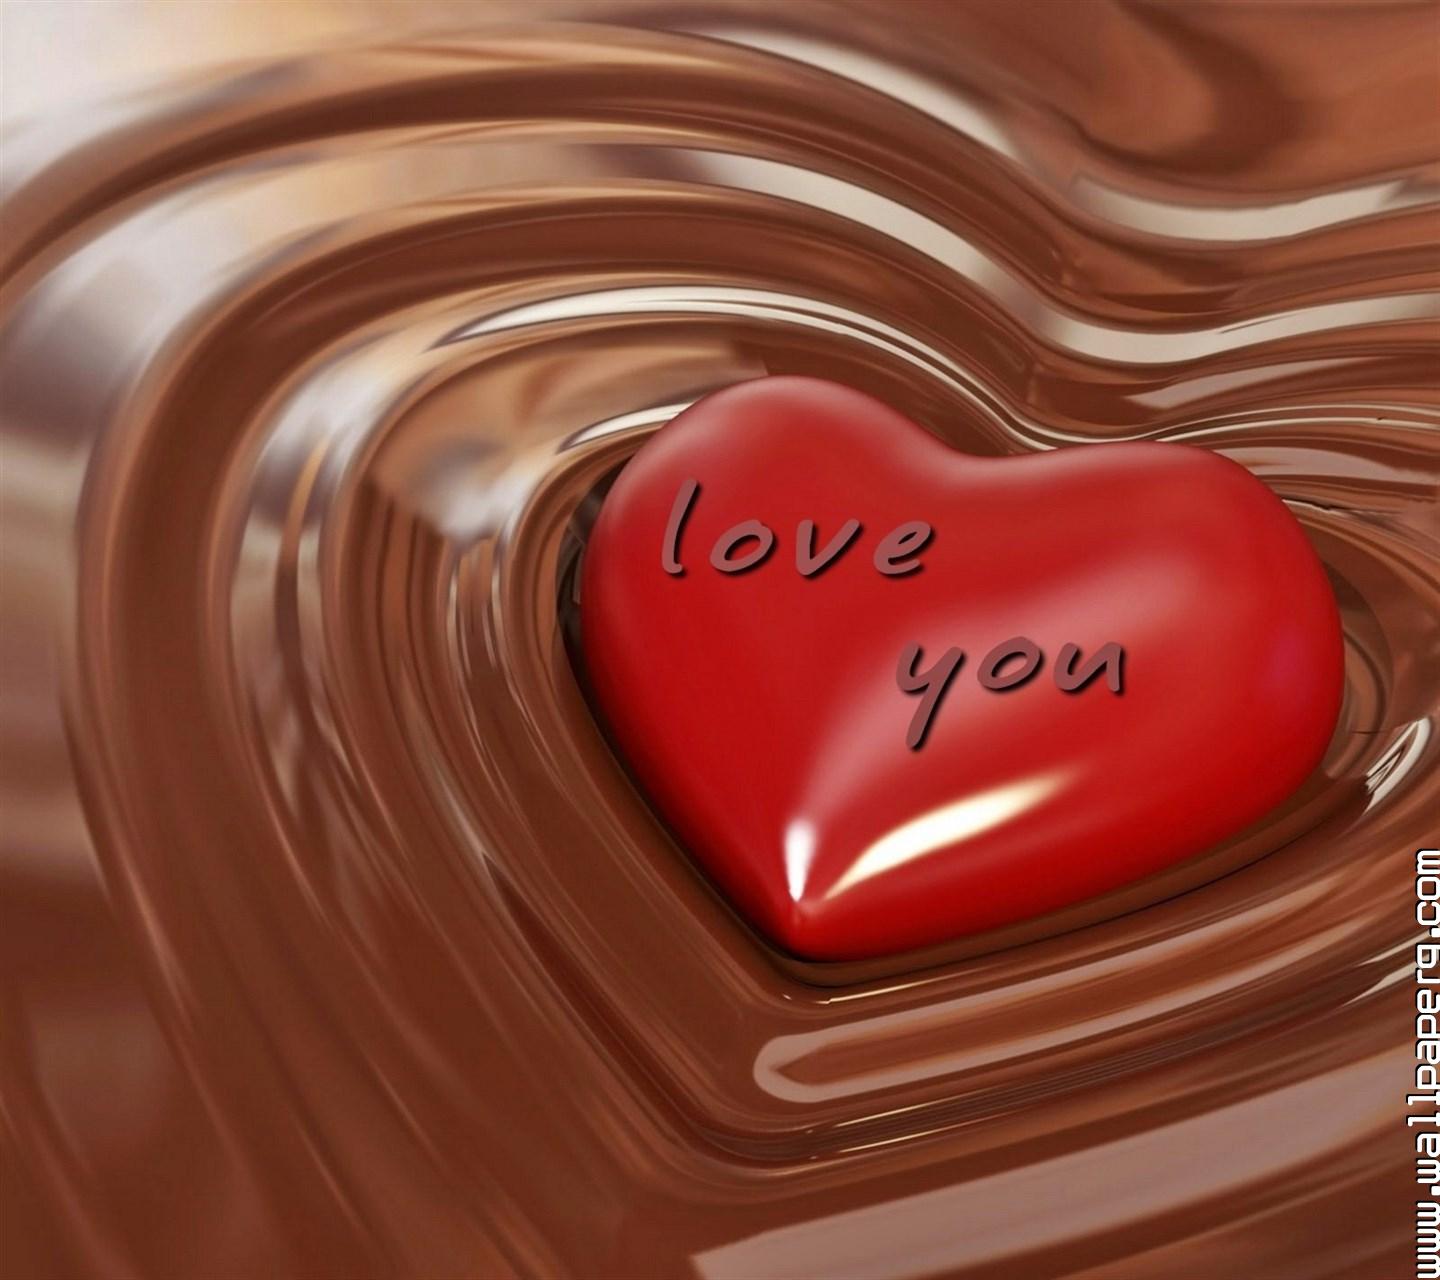 Download I love u(2) - Romantic wallpapers for your mobile cell phone